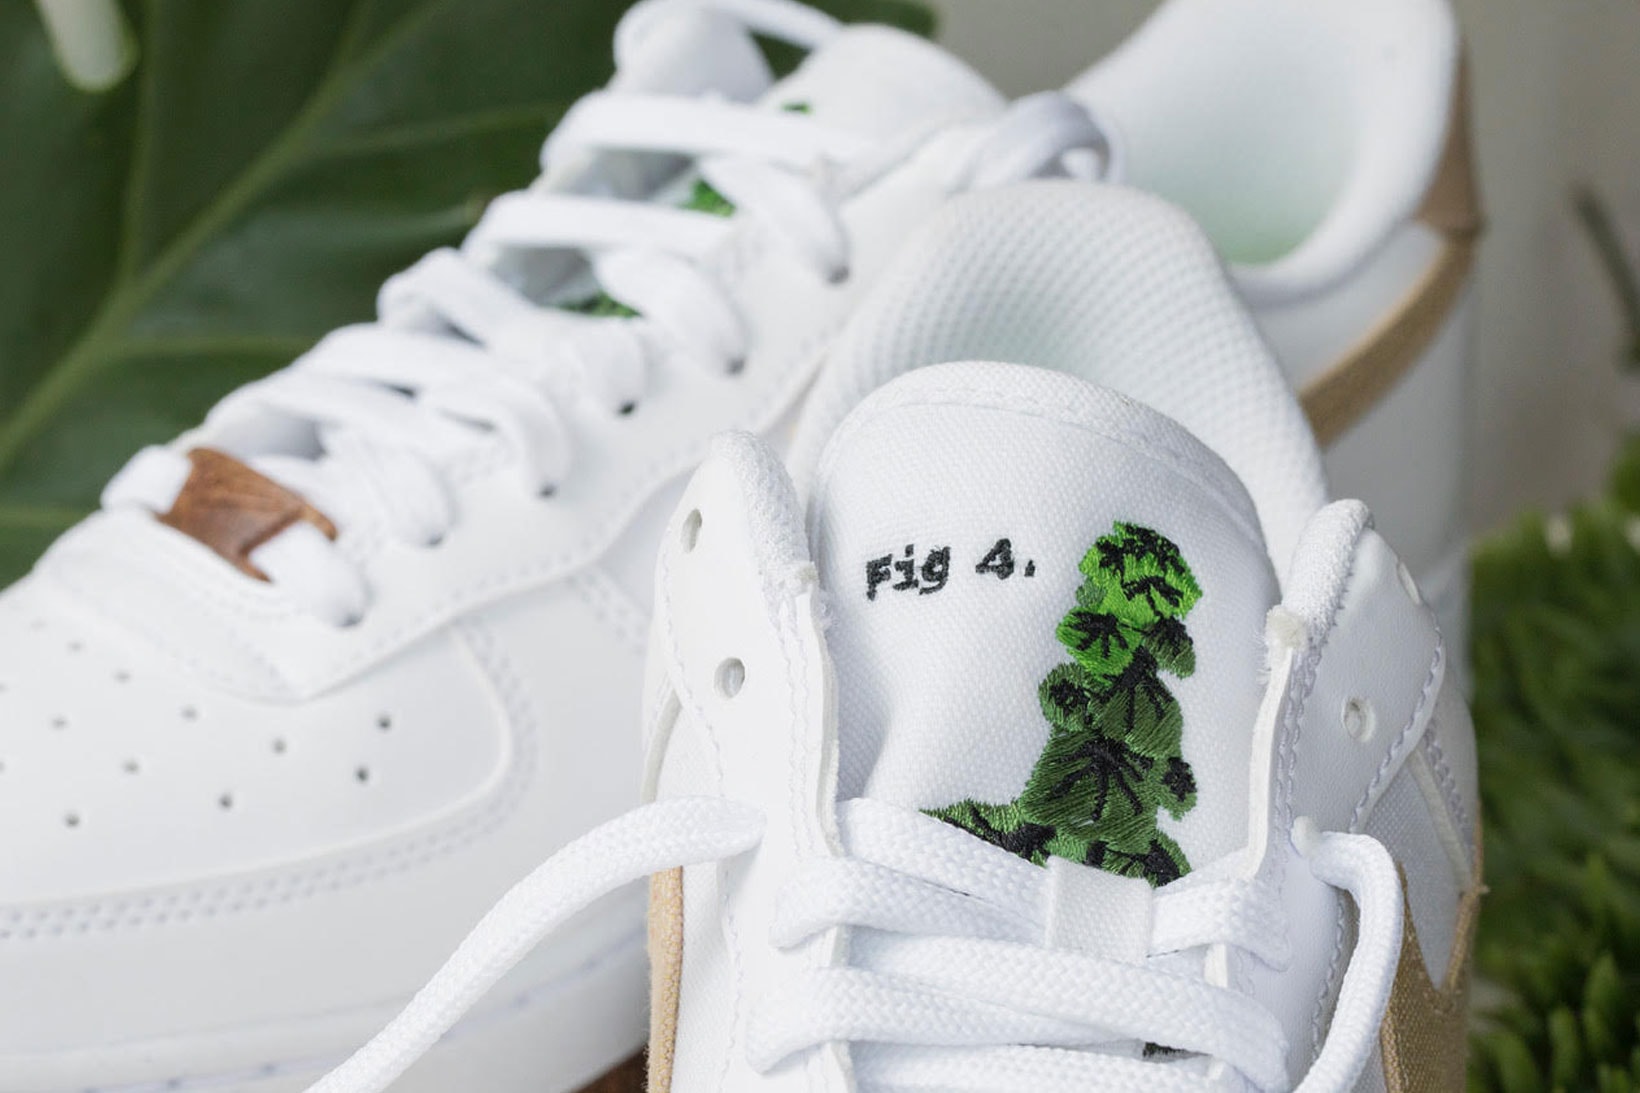 nike air force 1 af1 himalayan rhubarb plant dye sustainable sneakers details tongue tag tree embroidery